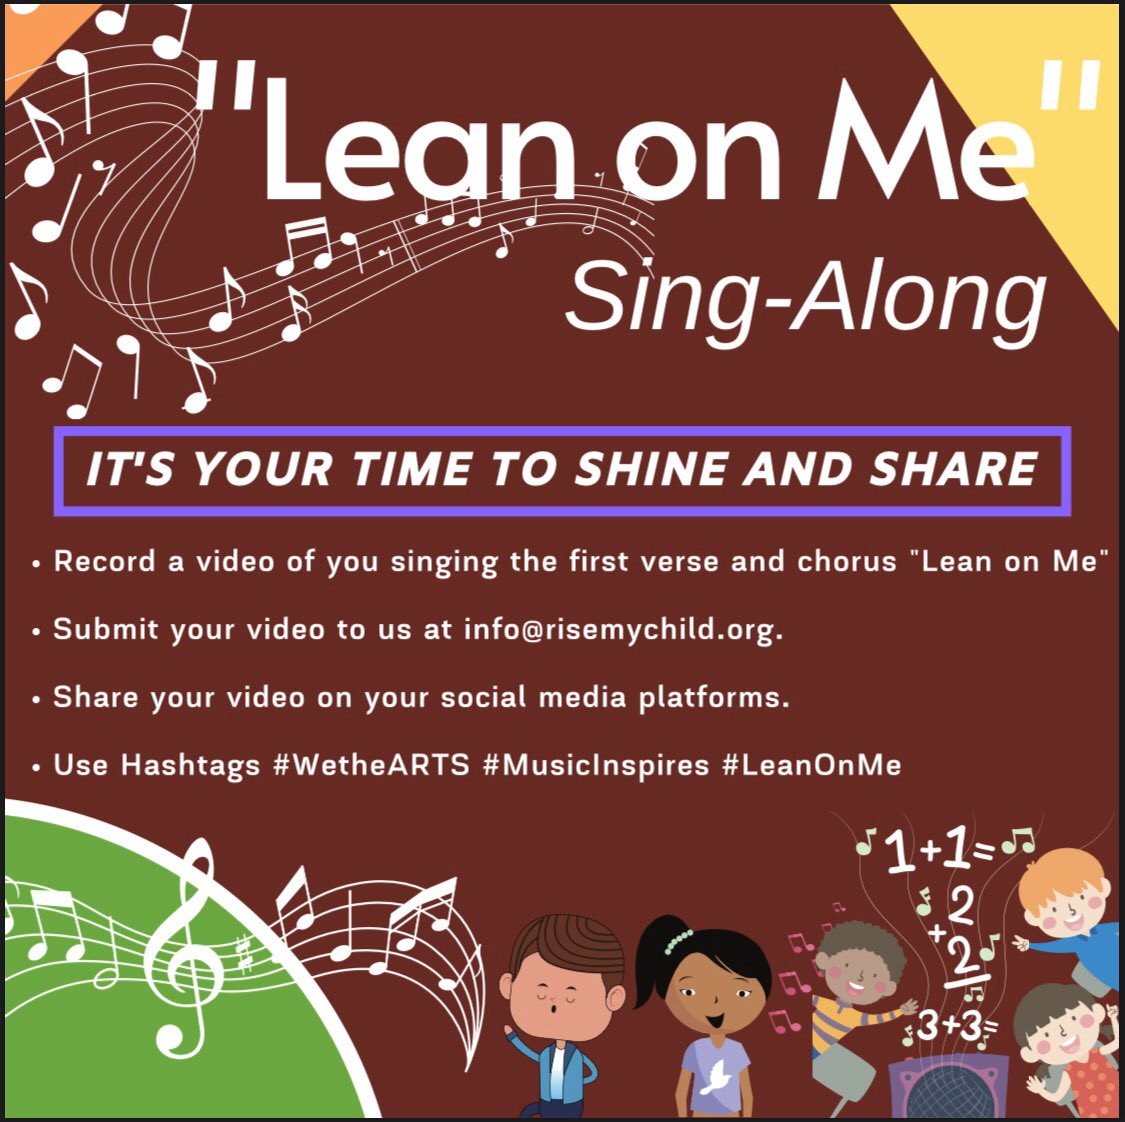 It’s Your Time to Shine and Share!
Join our “Lean On Me” Sing-Along by submitting your video to us at info@risemychild.org.
#WeTheARTS
#MusicInspires
#LeanOnMe
#RMC